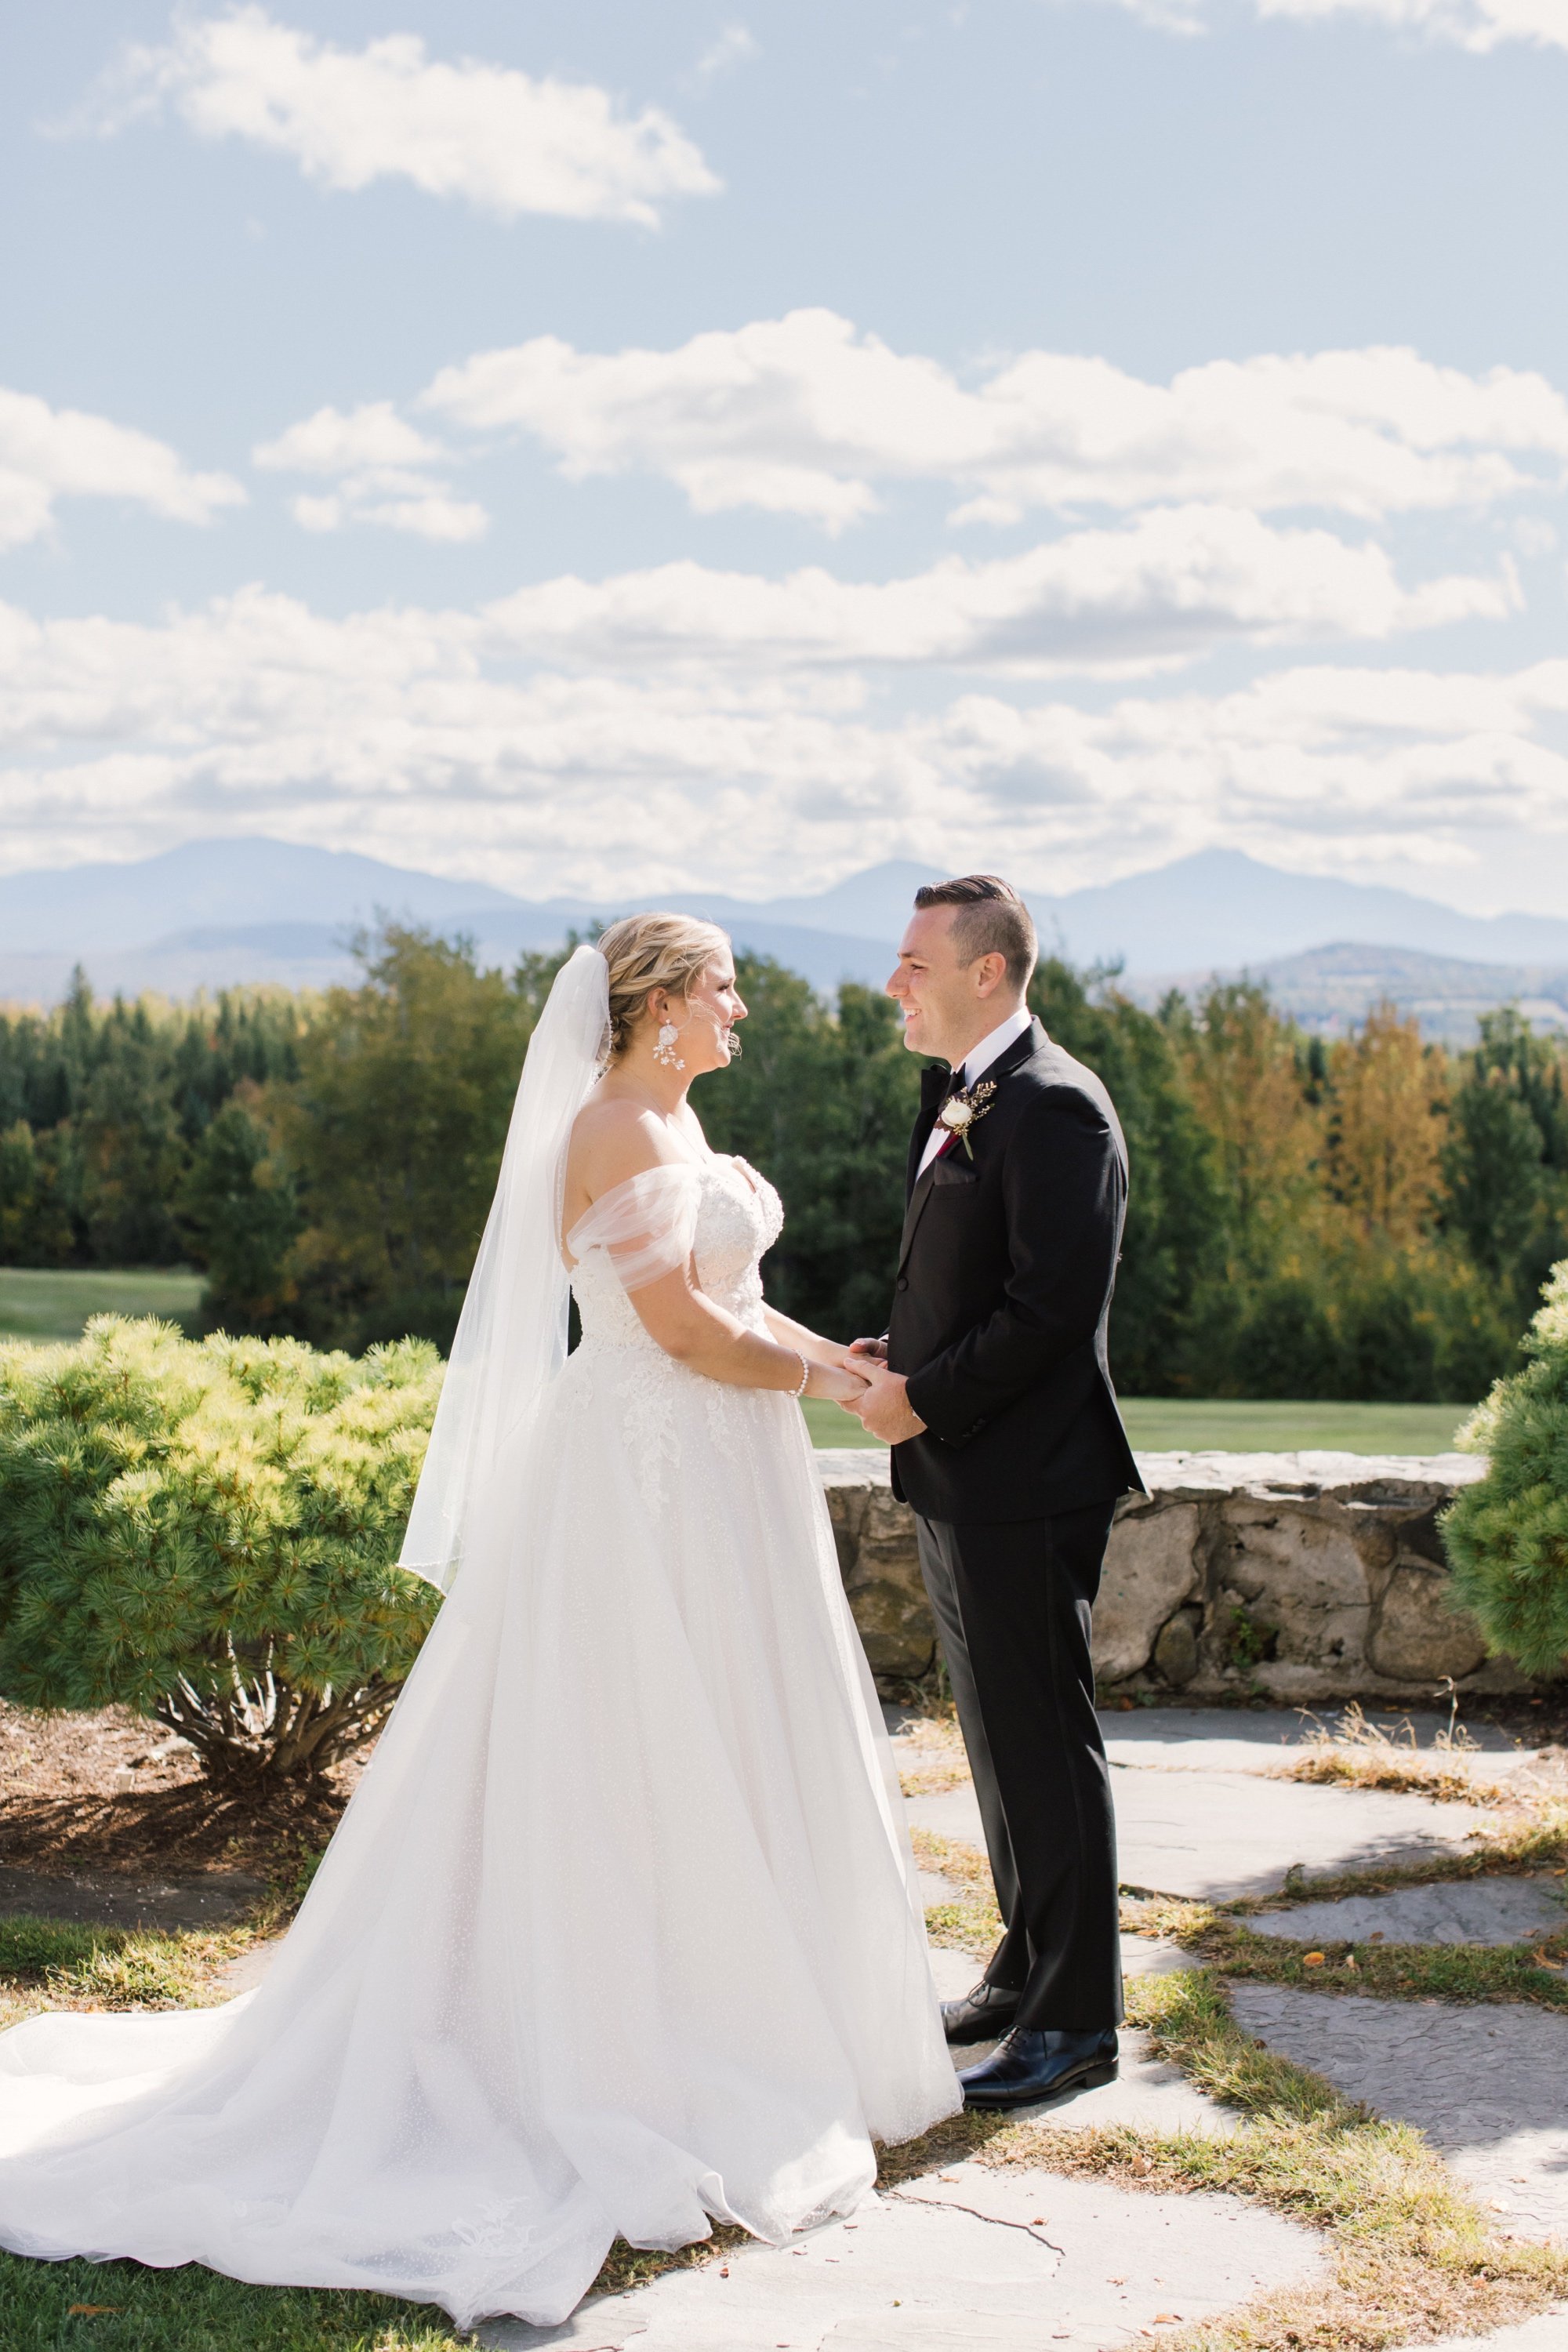 20_whitefield new hampshire NH wedding photography photographer melanie voros blissful events Mountain View Grand Resort and Spa frenchs point washington white mountains MVG.jpg